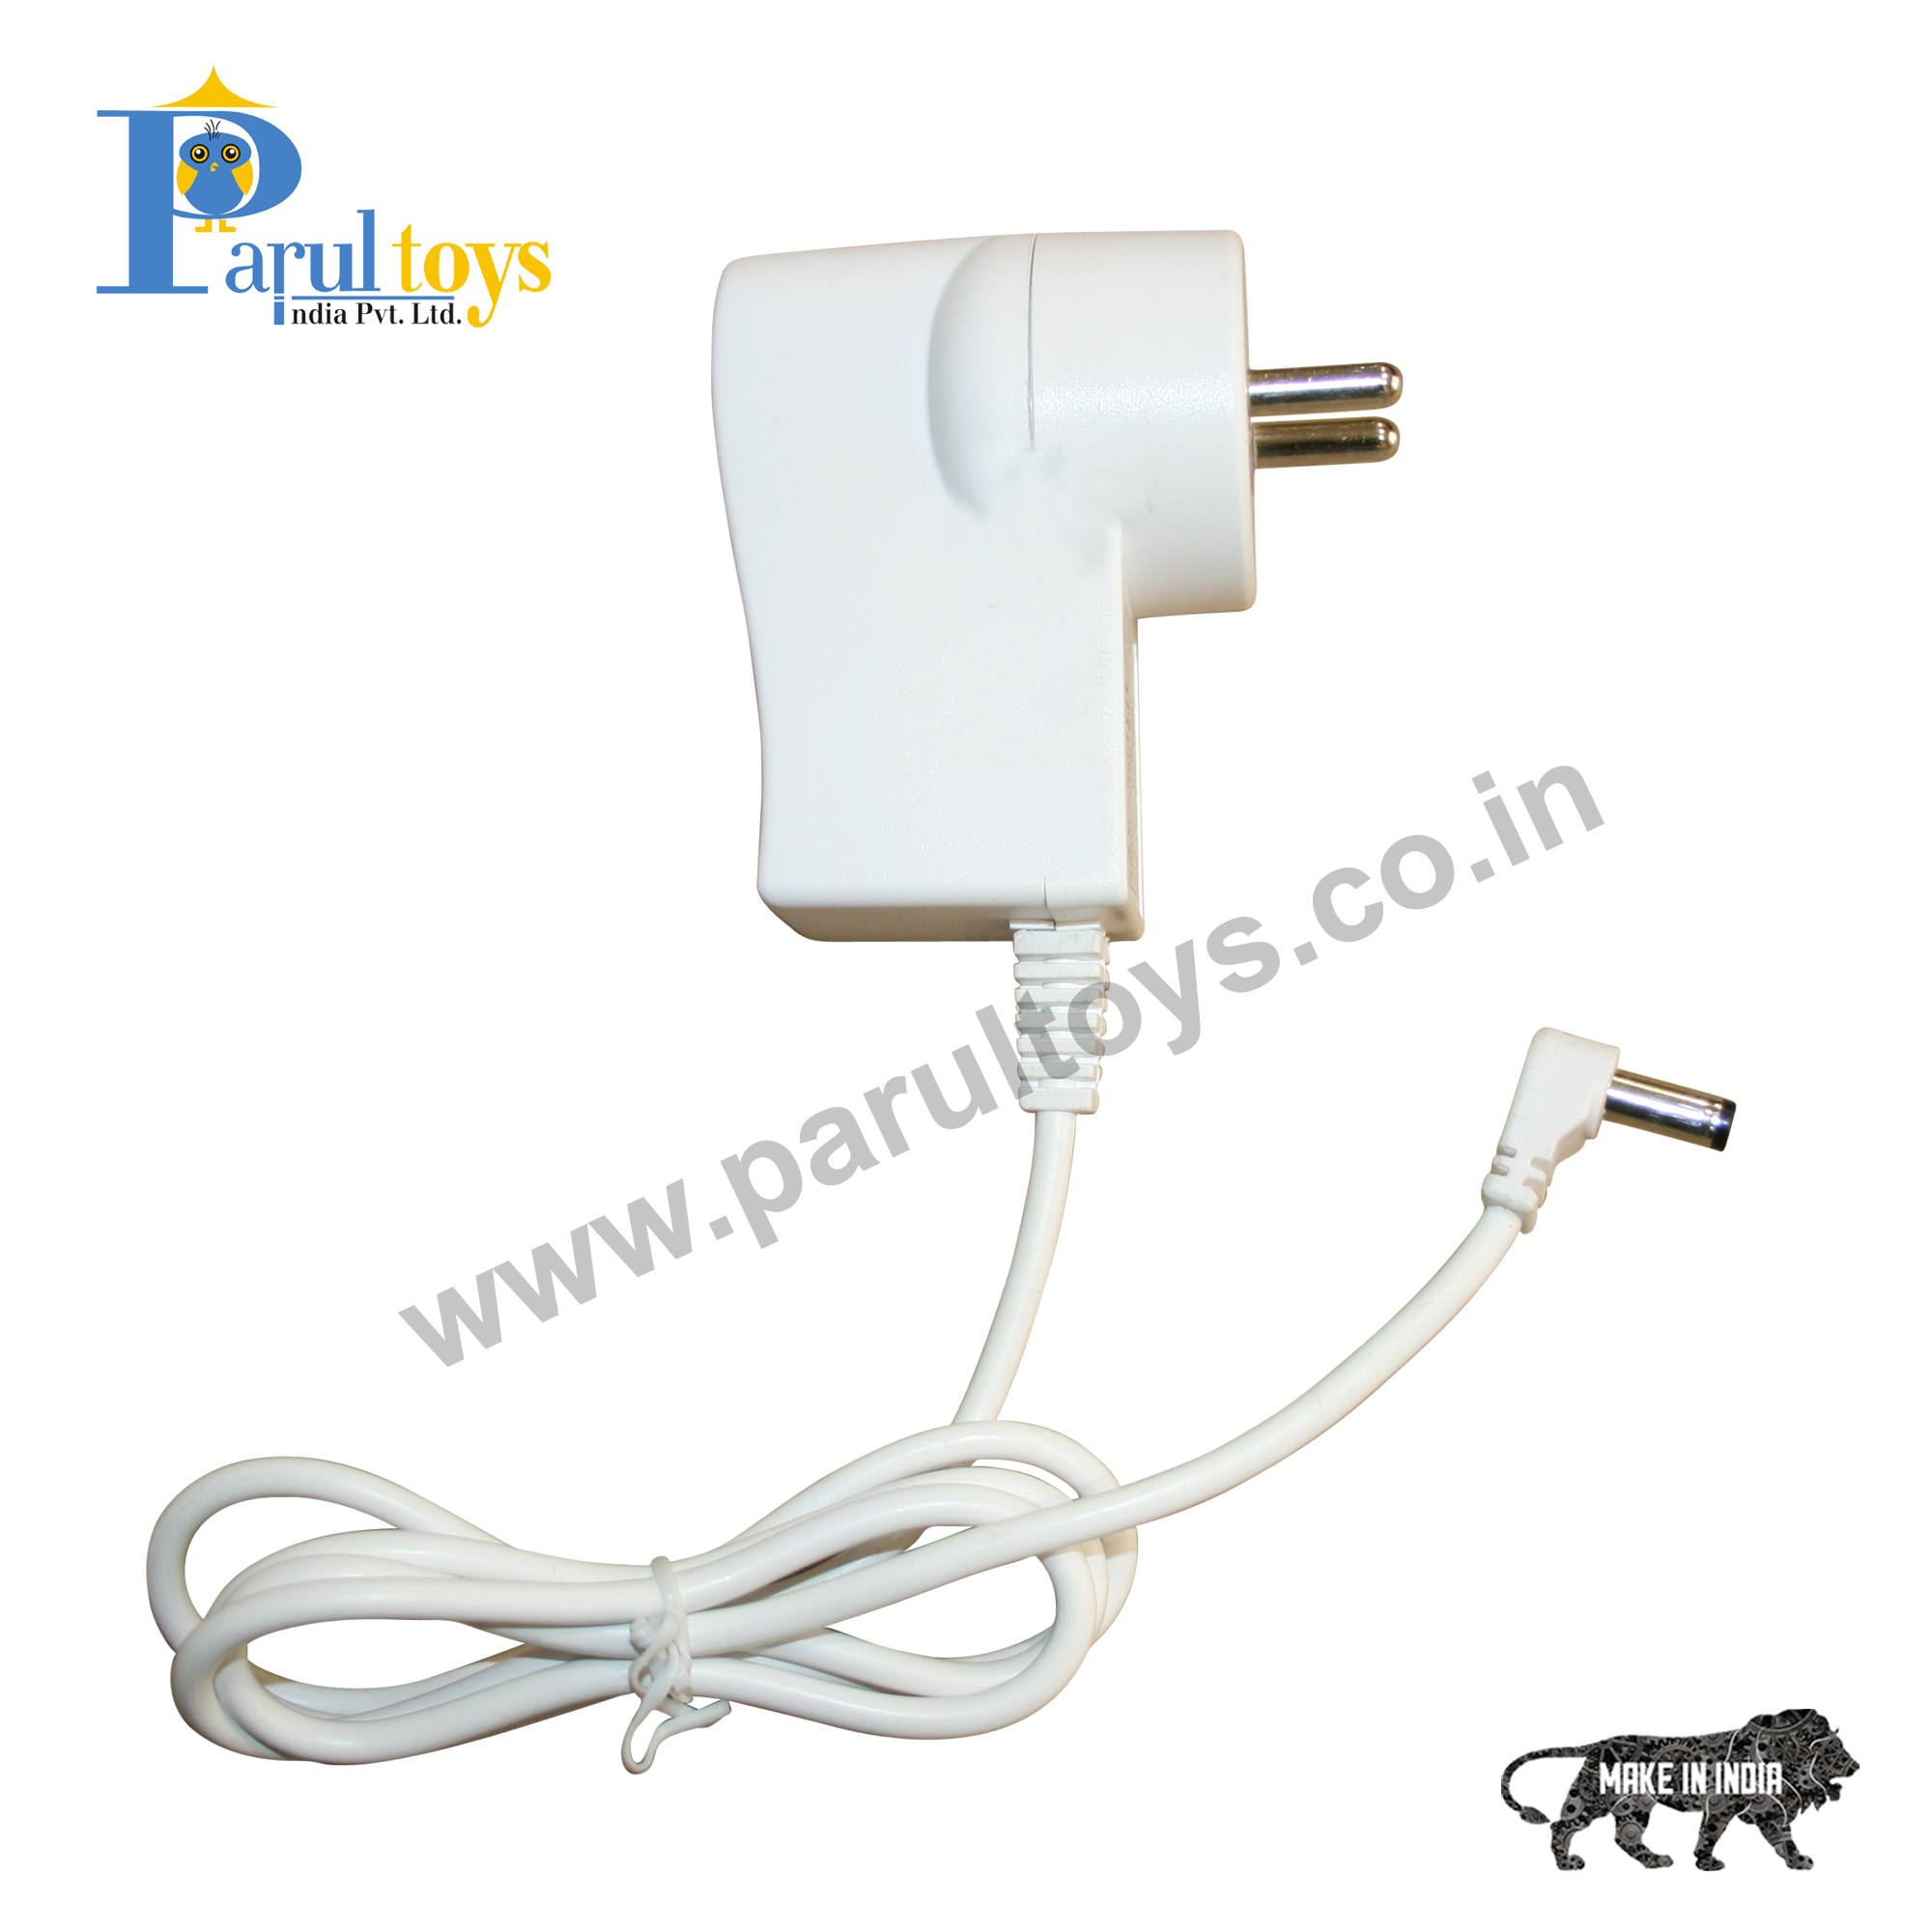 12V Power Adapter - Parul Toys